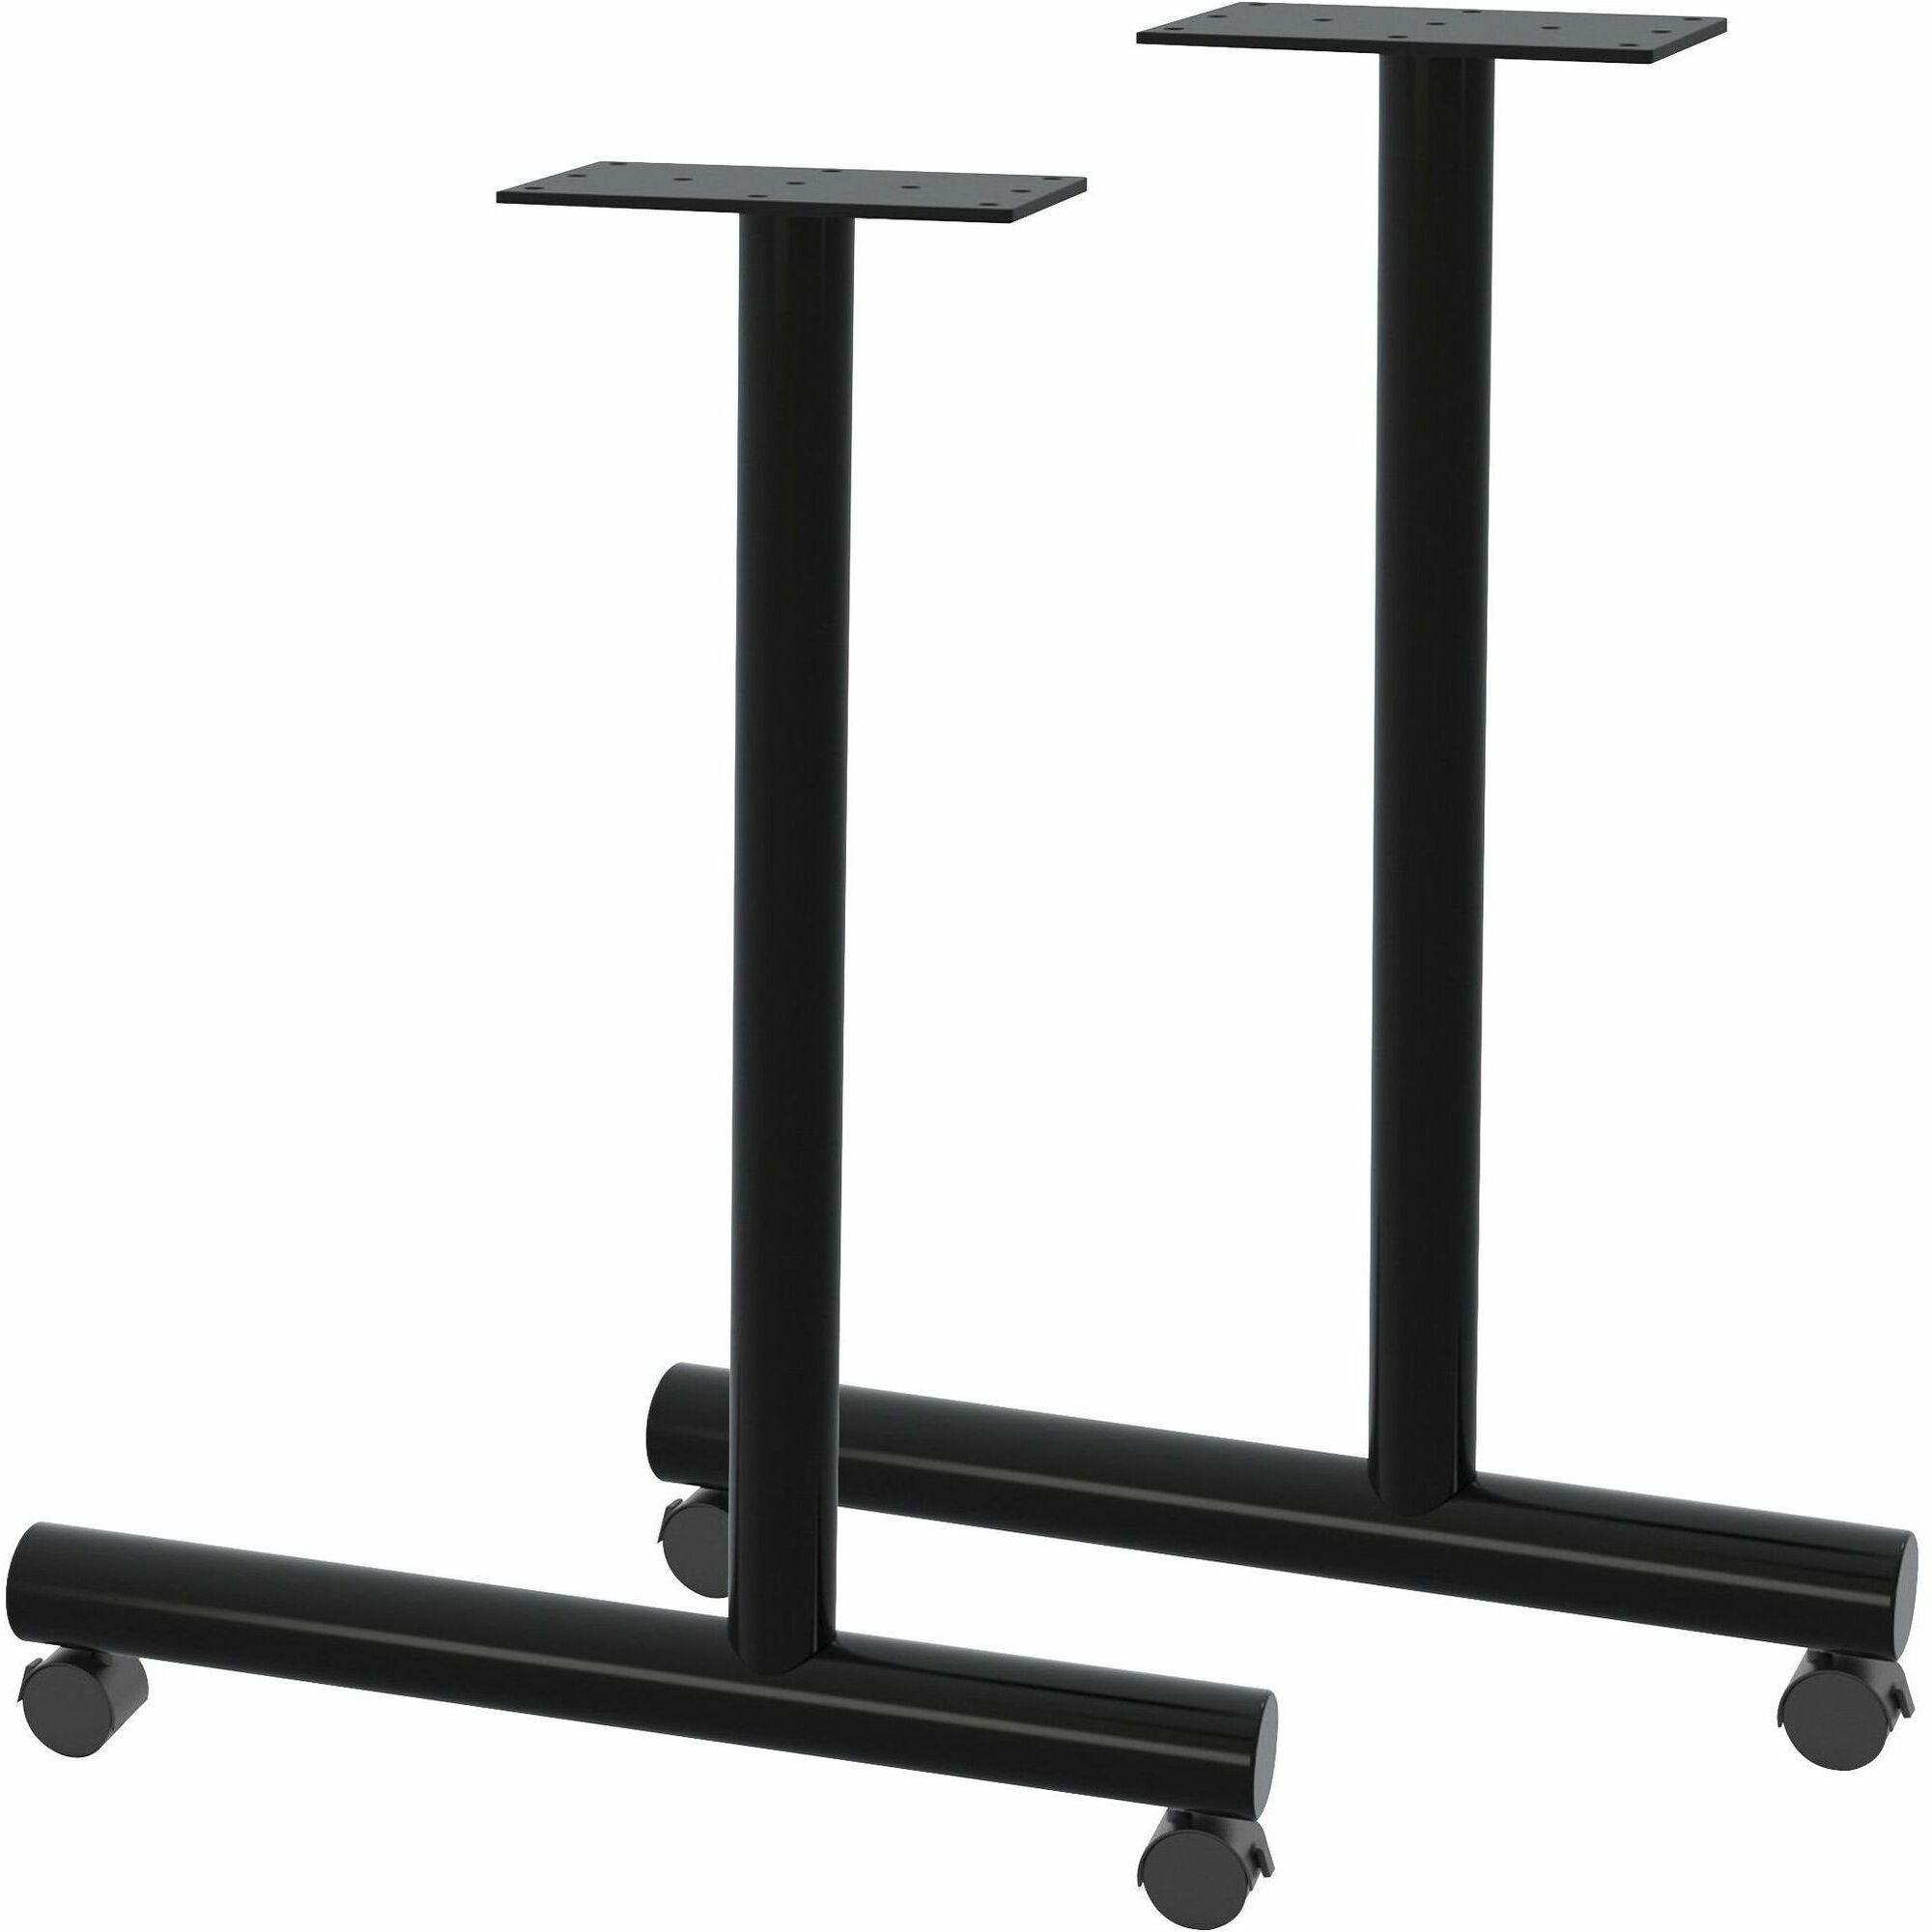 Lorell Training Table C-Leg Table Base with 2" Casters - Black C-leg Base - 27" Height x 22" Width - Assembly Required - 1 / Set - 1